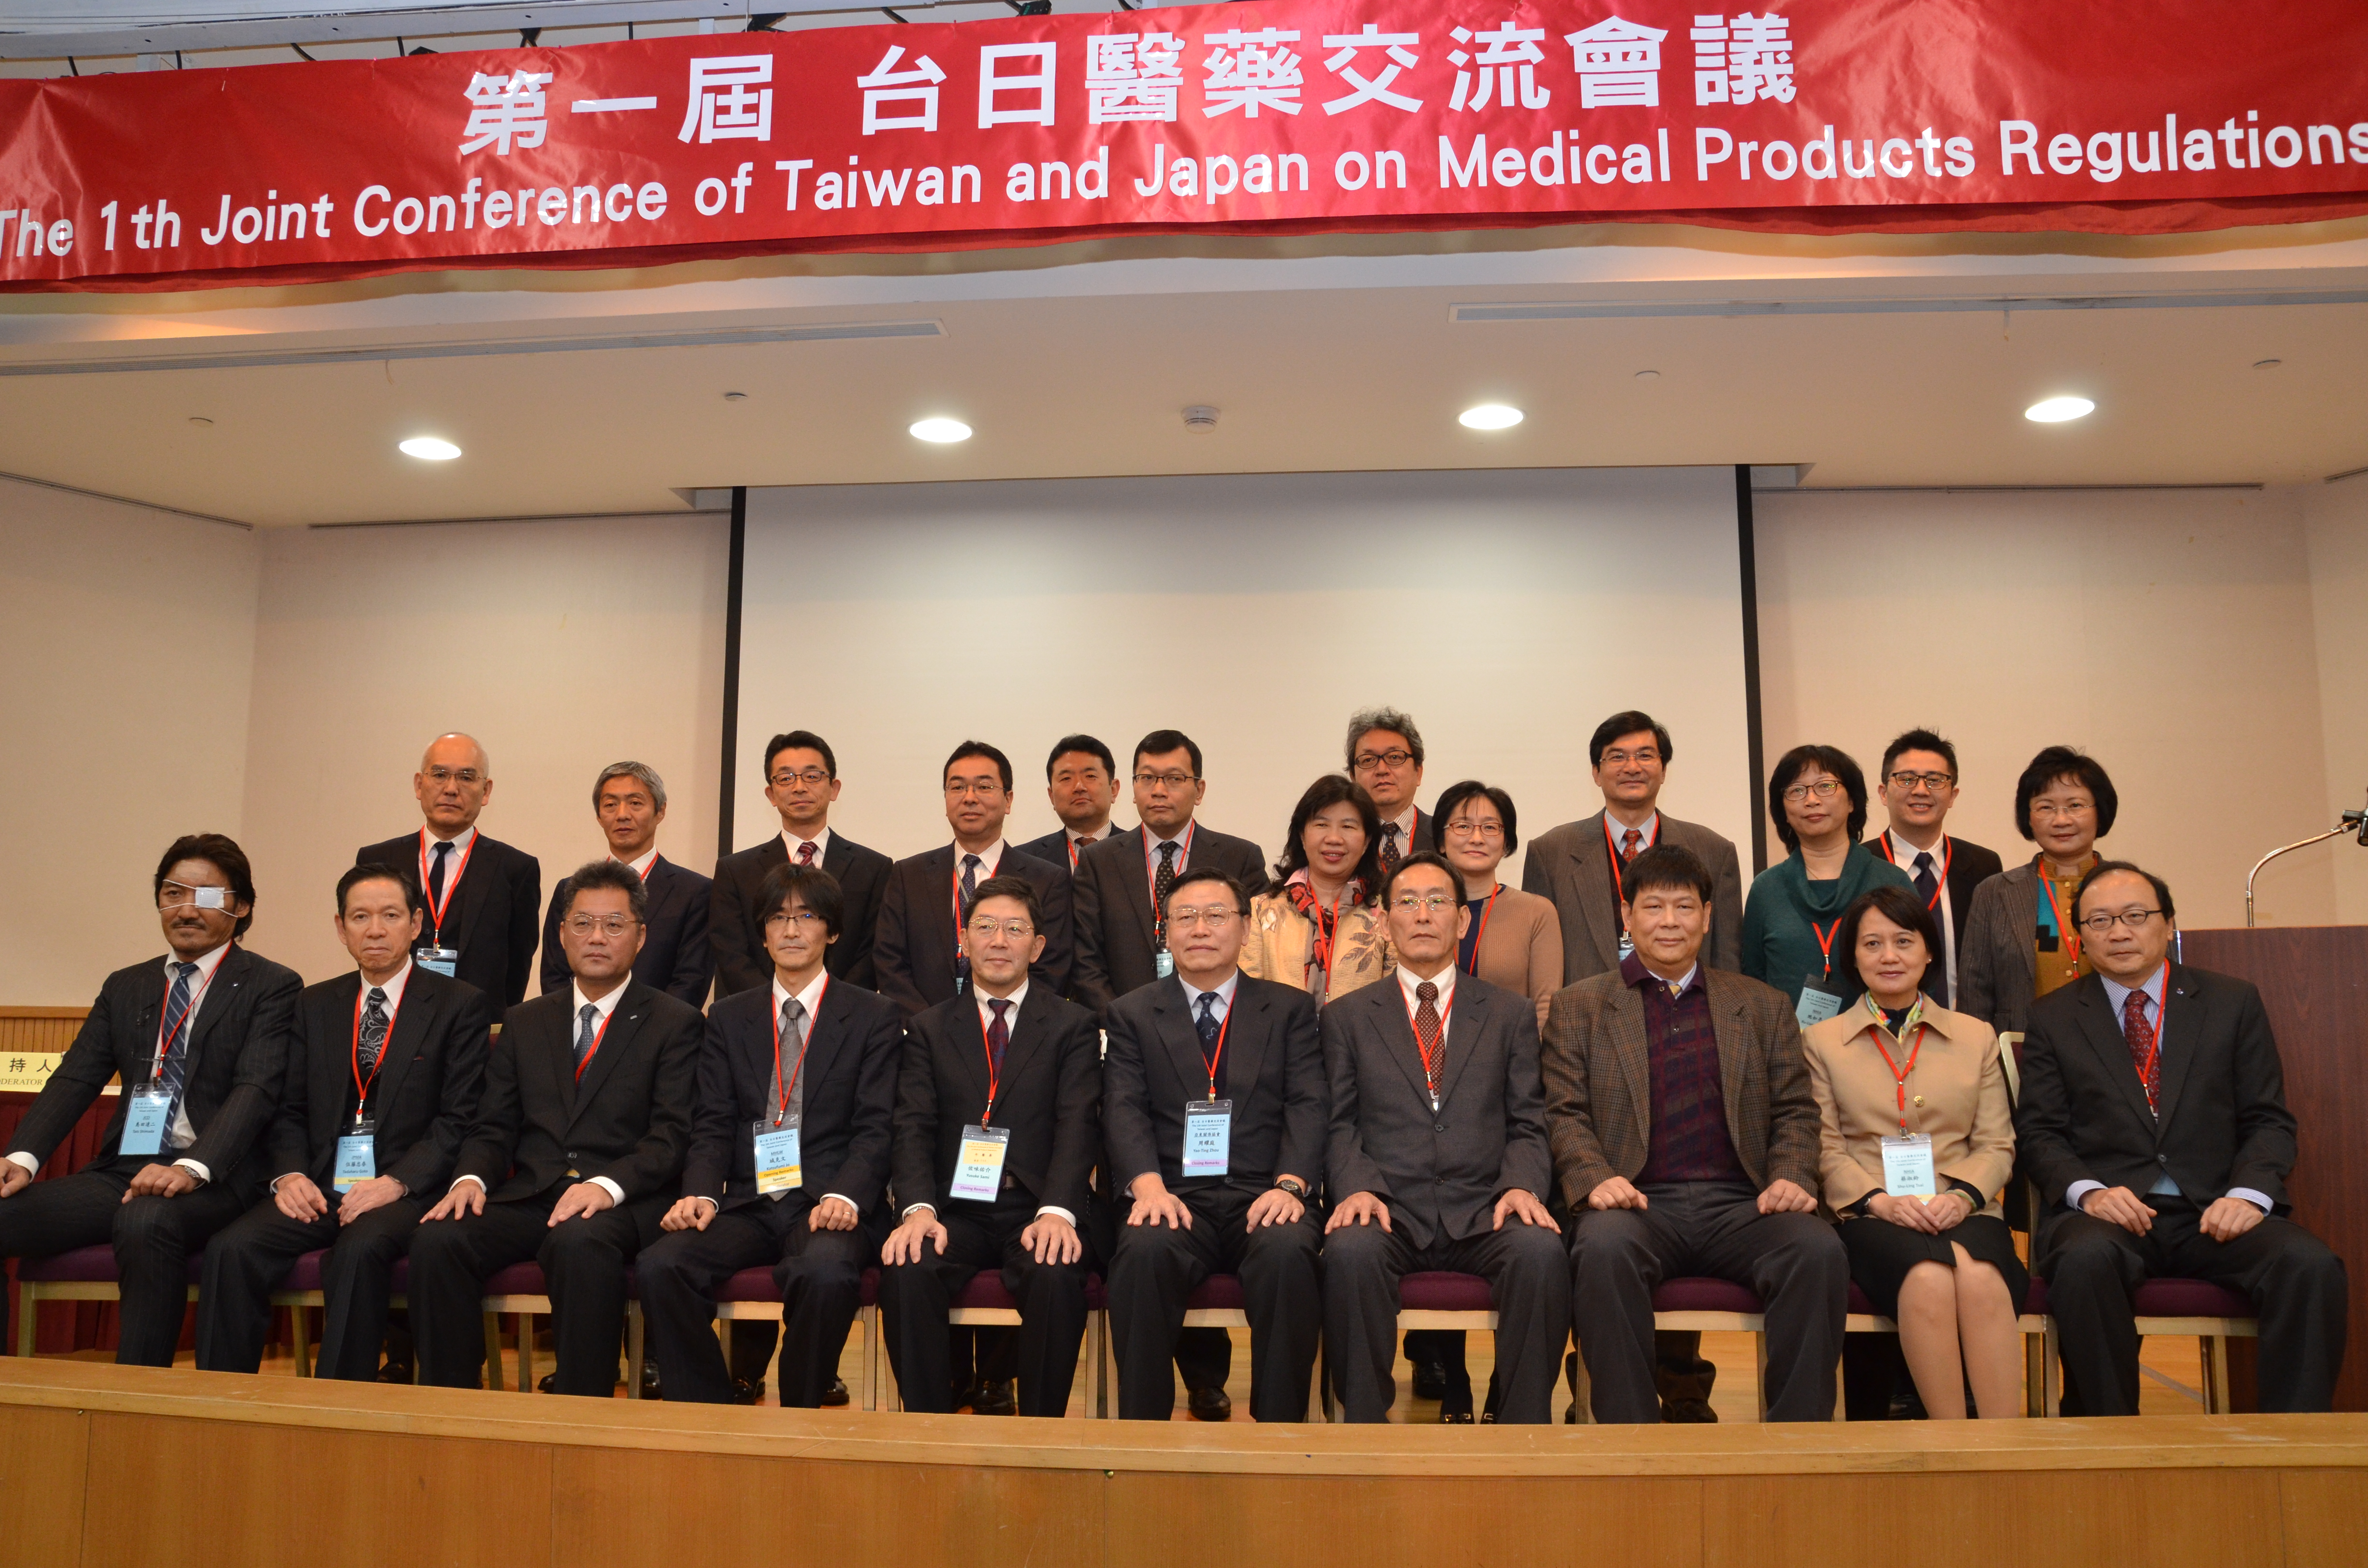 1st Joint Conference of Taiwan and Japan on Medical Products Regulations